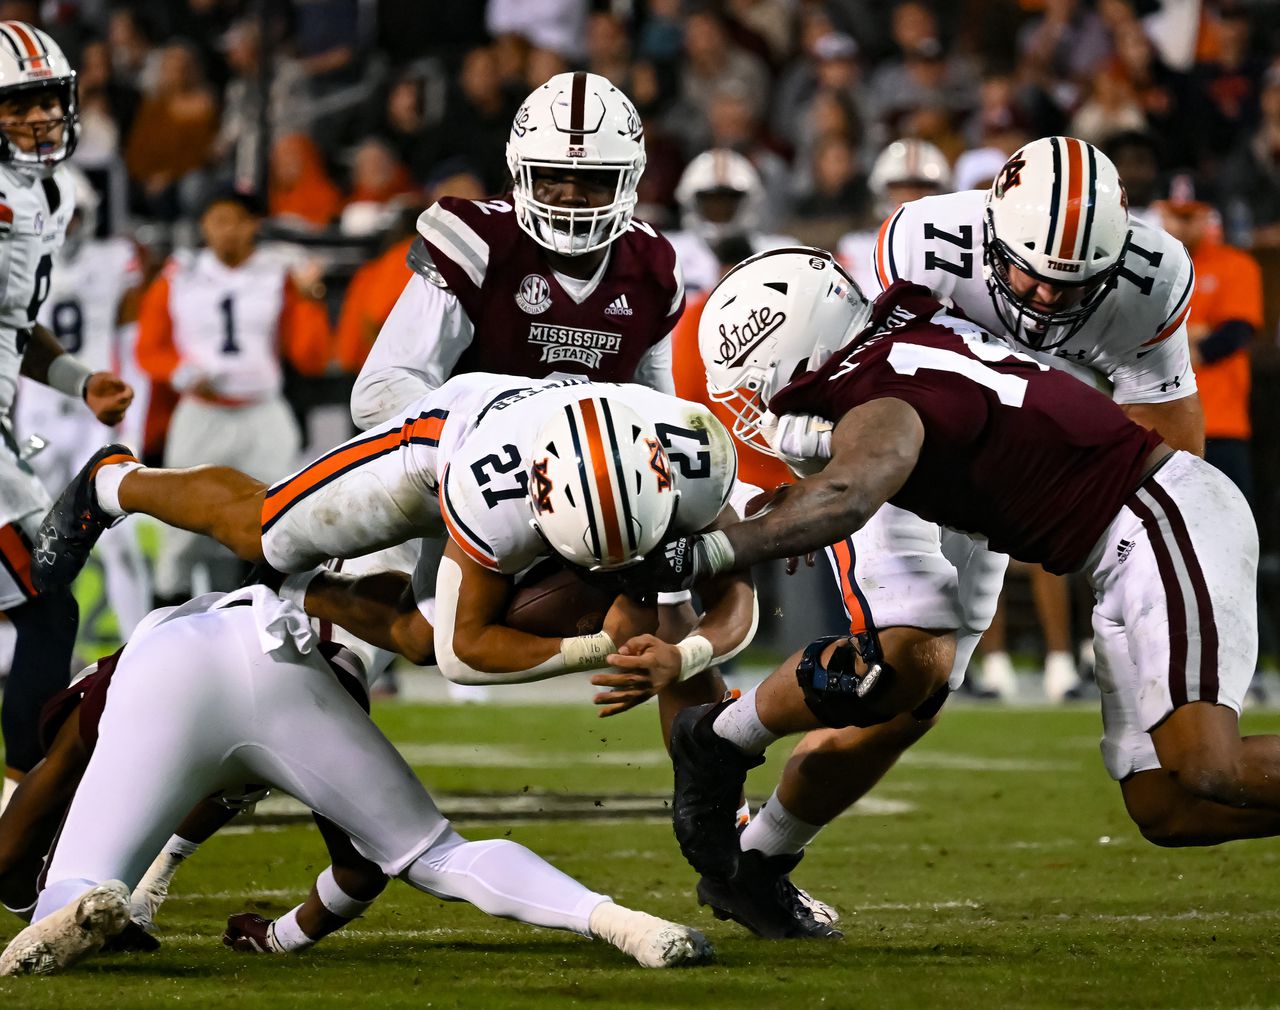 What they're saying nationally about Auburn's OT loss to Mississippi State